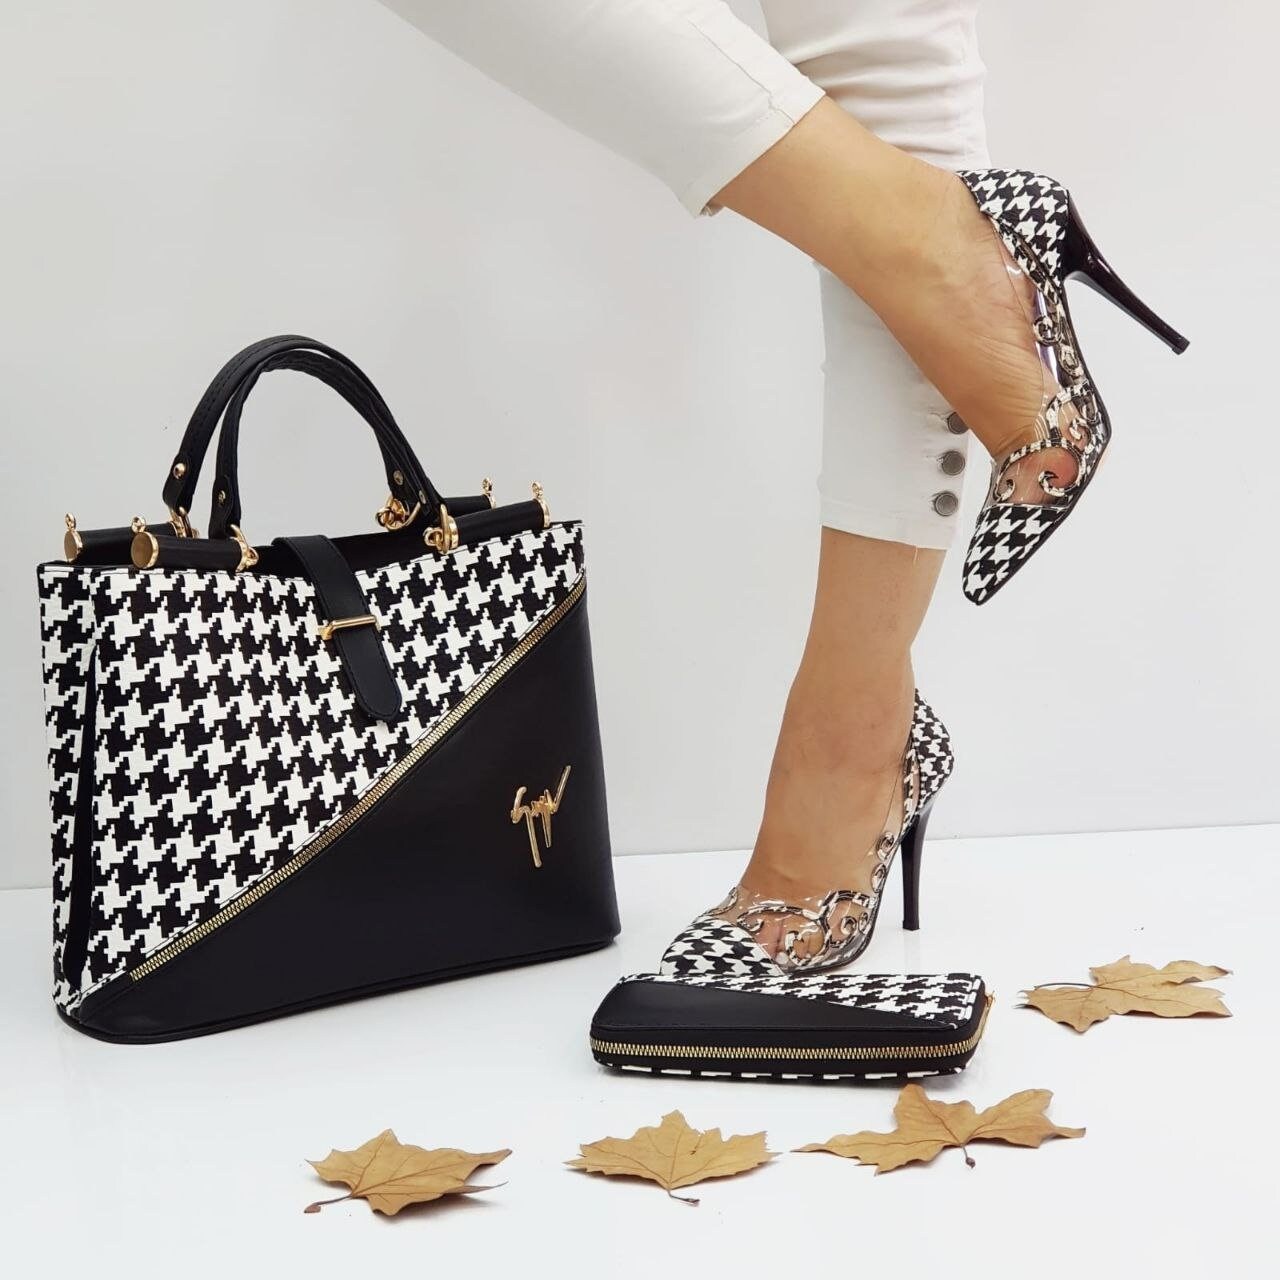 Matching Shoes and Bag Set for Women - Top Handle Bags and Shoulder Bags - Purse and Wallet - Stylish Heel Pumps - Big US Size 6 7 8 9 10 11